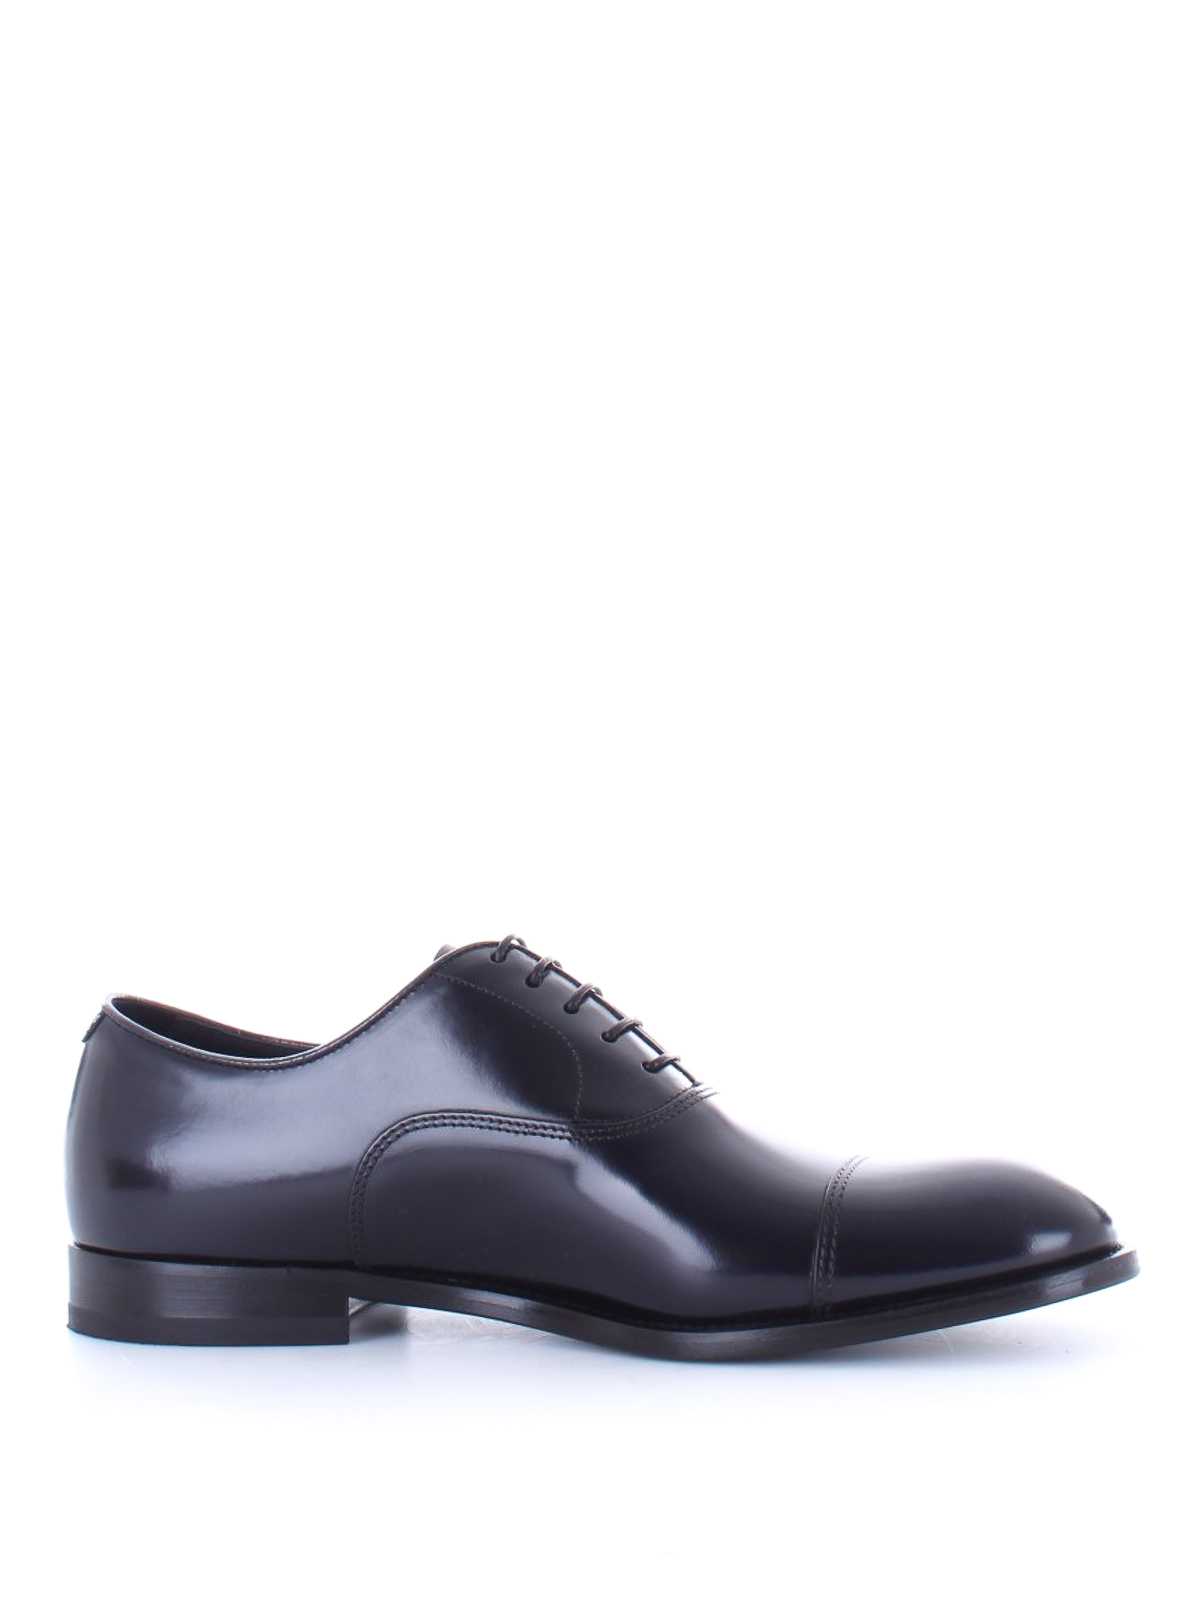 DOUCAL'S BRUSHED BLUE LEATHER OXFORD SHOES